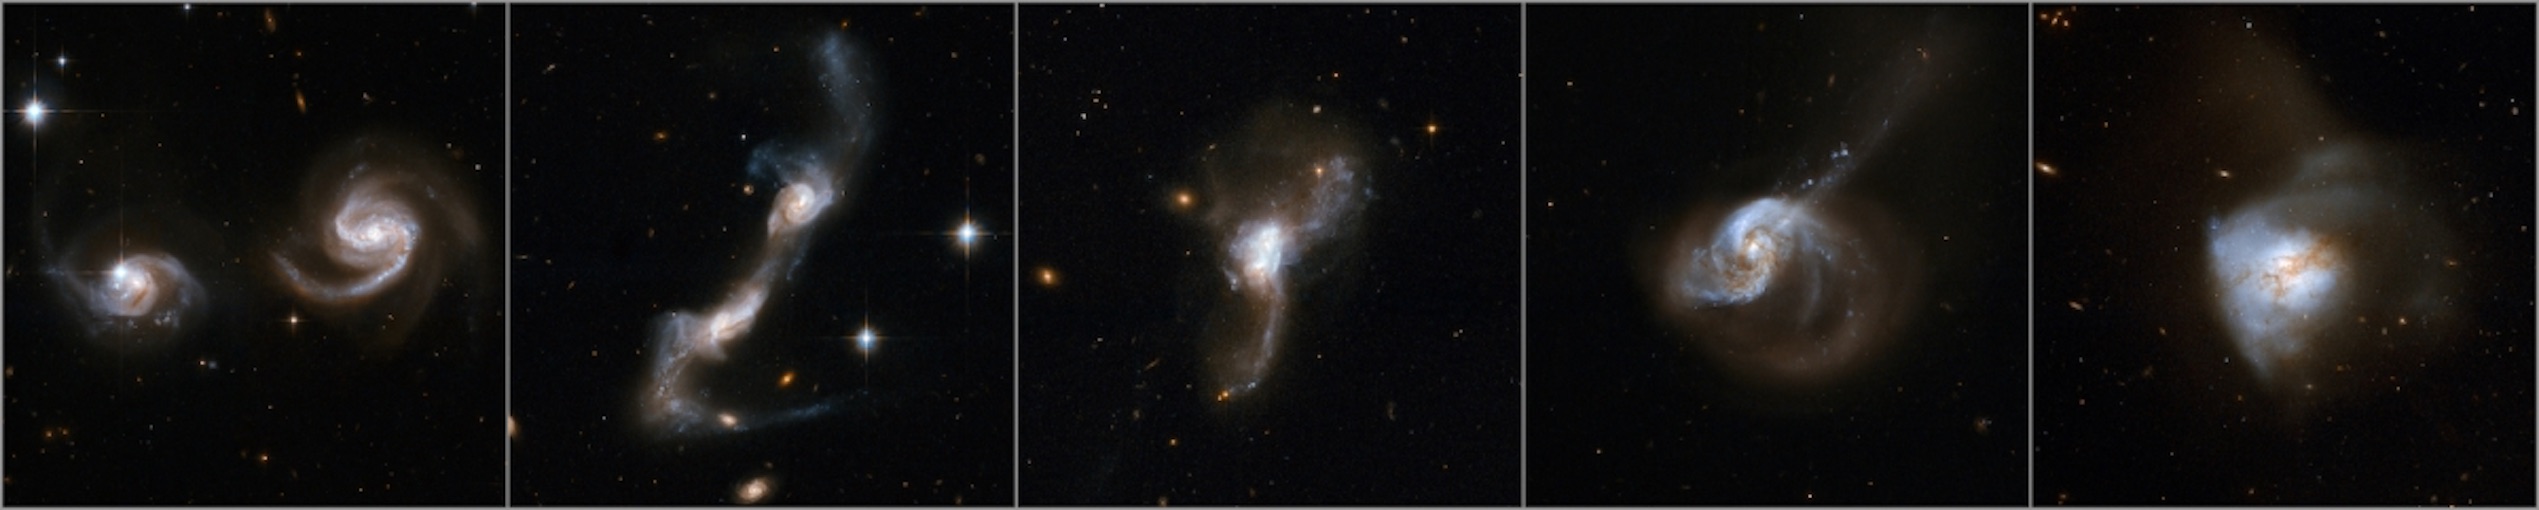 The galaxy merger sequence